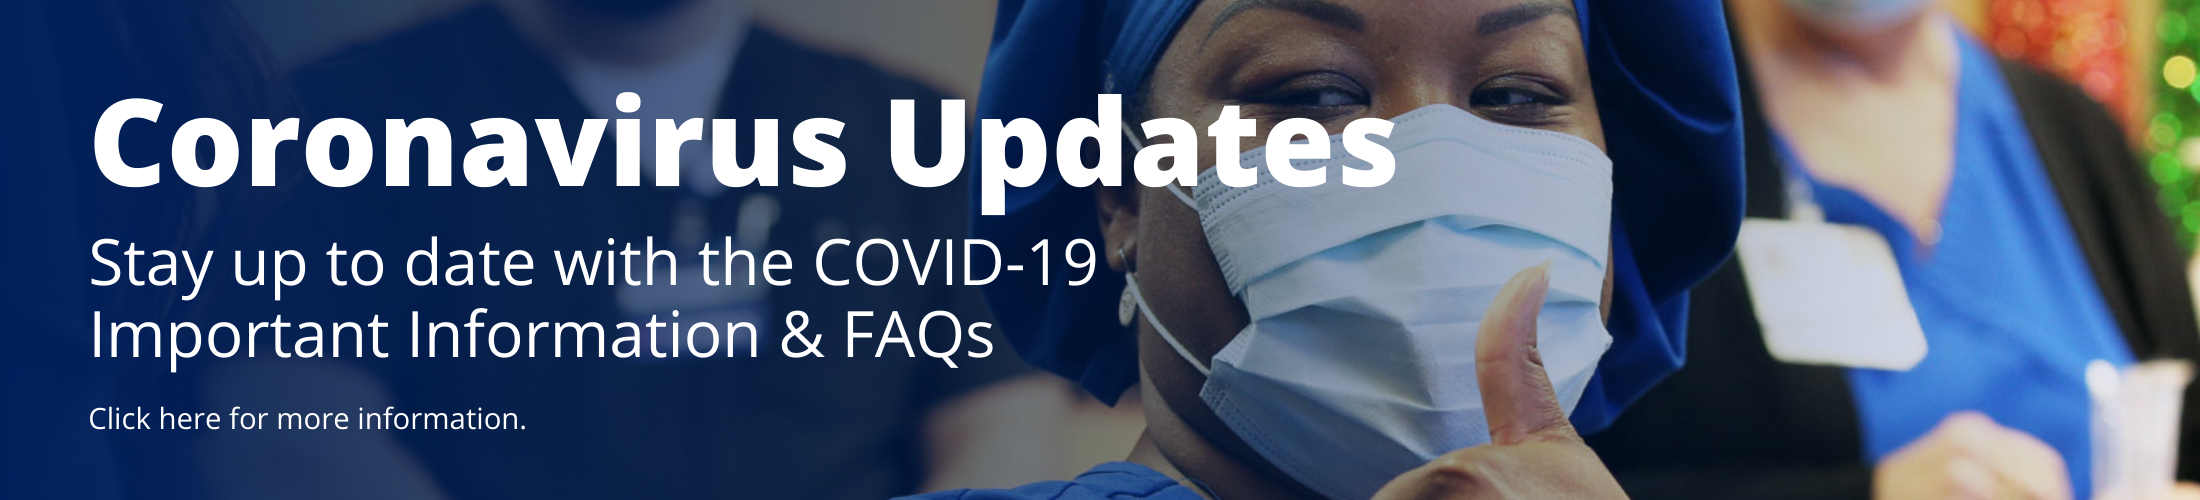 Coronavirus Updates 
Stay up to date with the COVID-19 Important information & FAQs. 
Click here for more information.